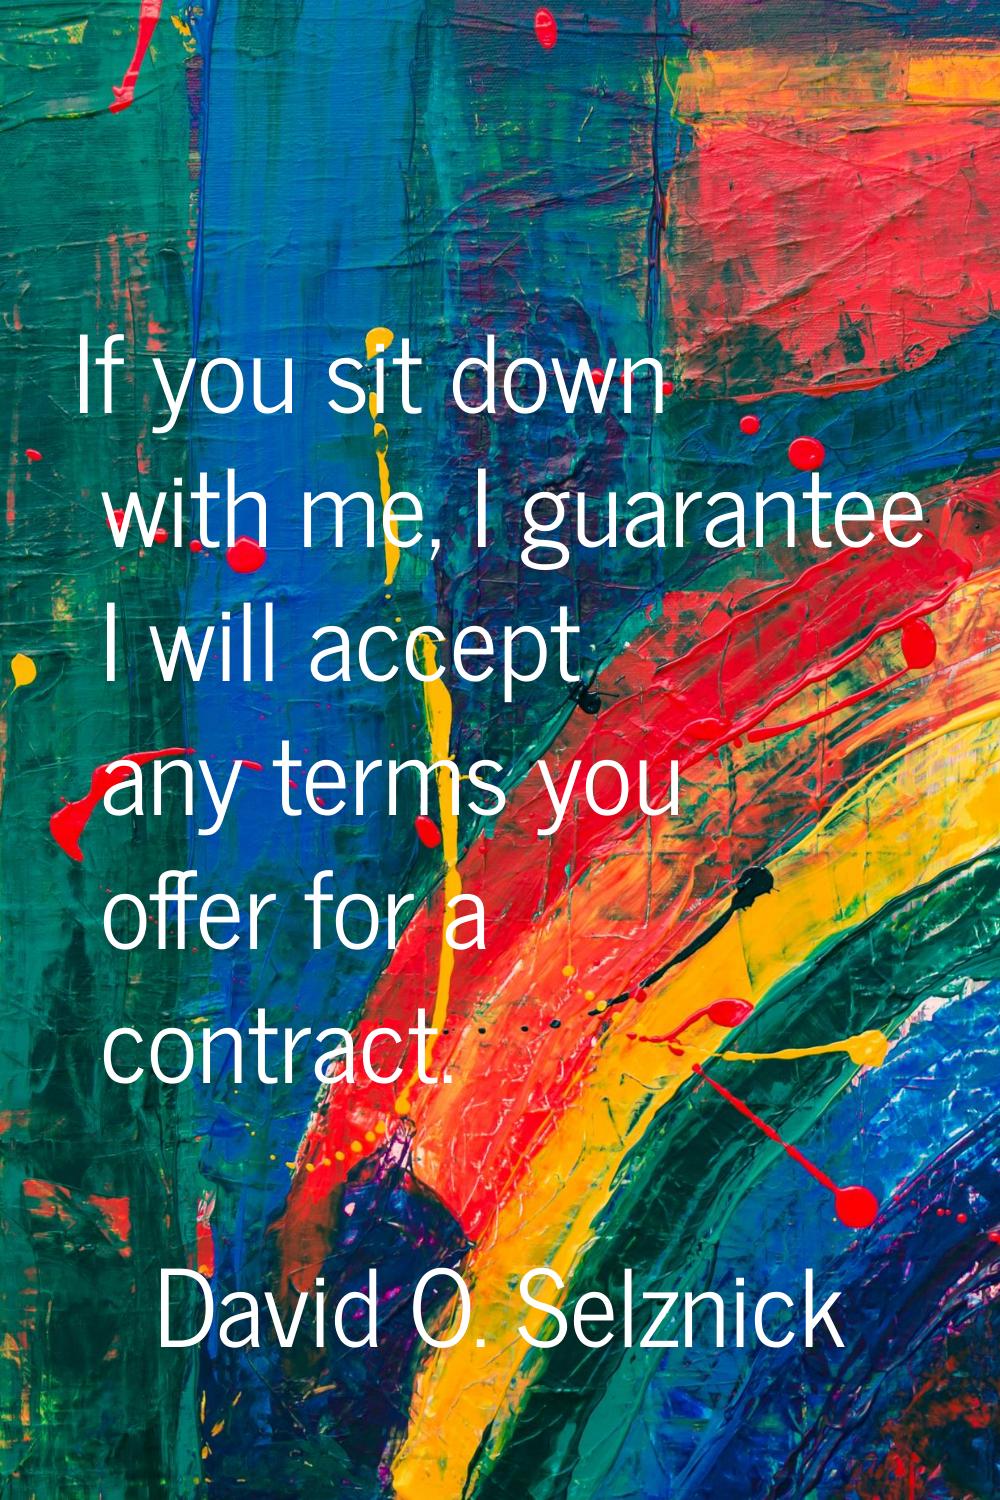 If you sit down with me, I guarantee I will accept any terms you offer for a contract.